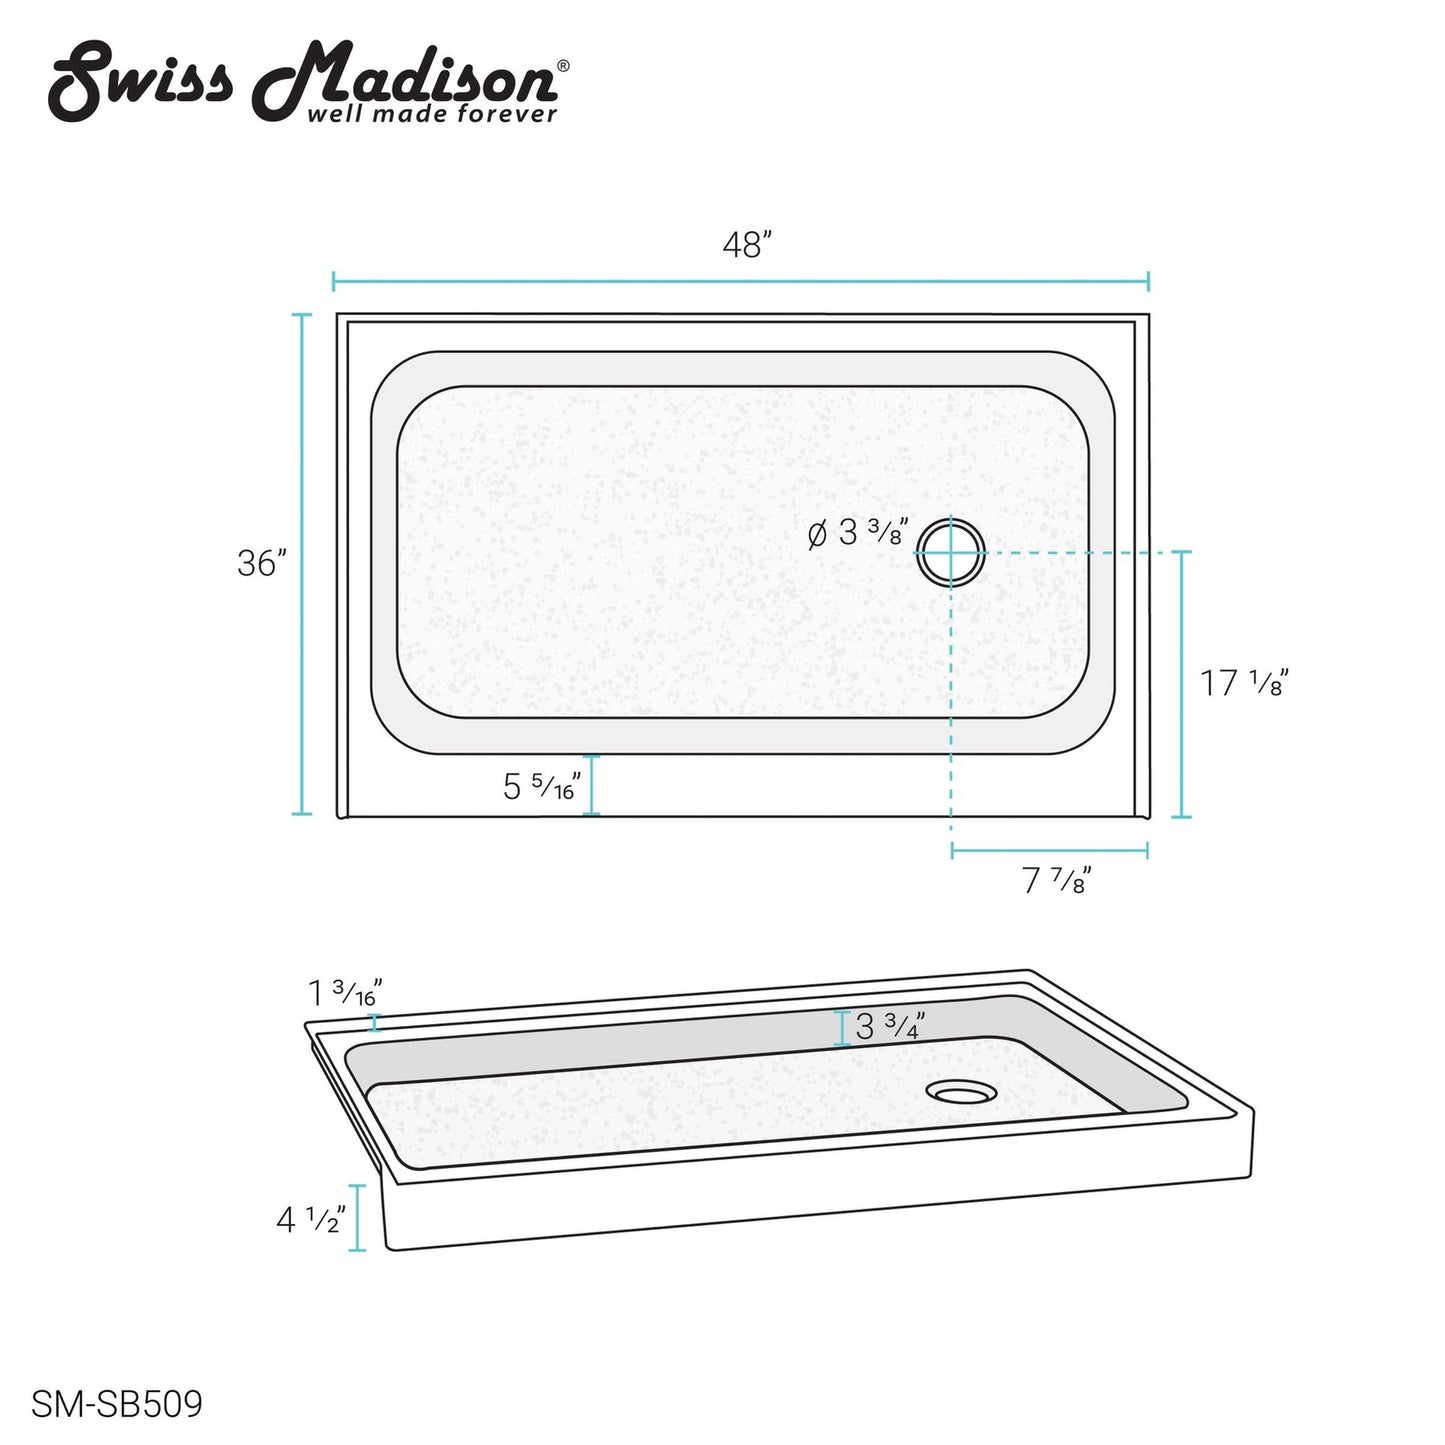 Swiss Madison Voltaire 48" x 36" Three-Wall Alcove White Right-Hand Drain Shower Base With Built-In Integral Flange